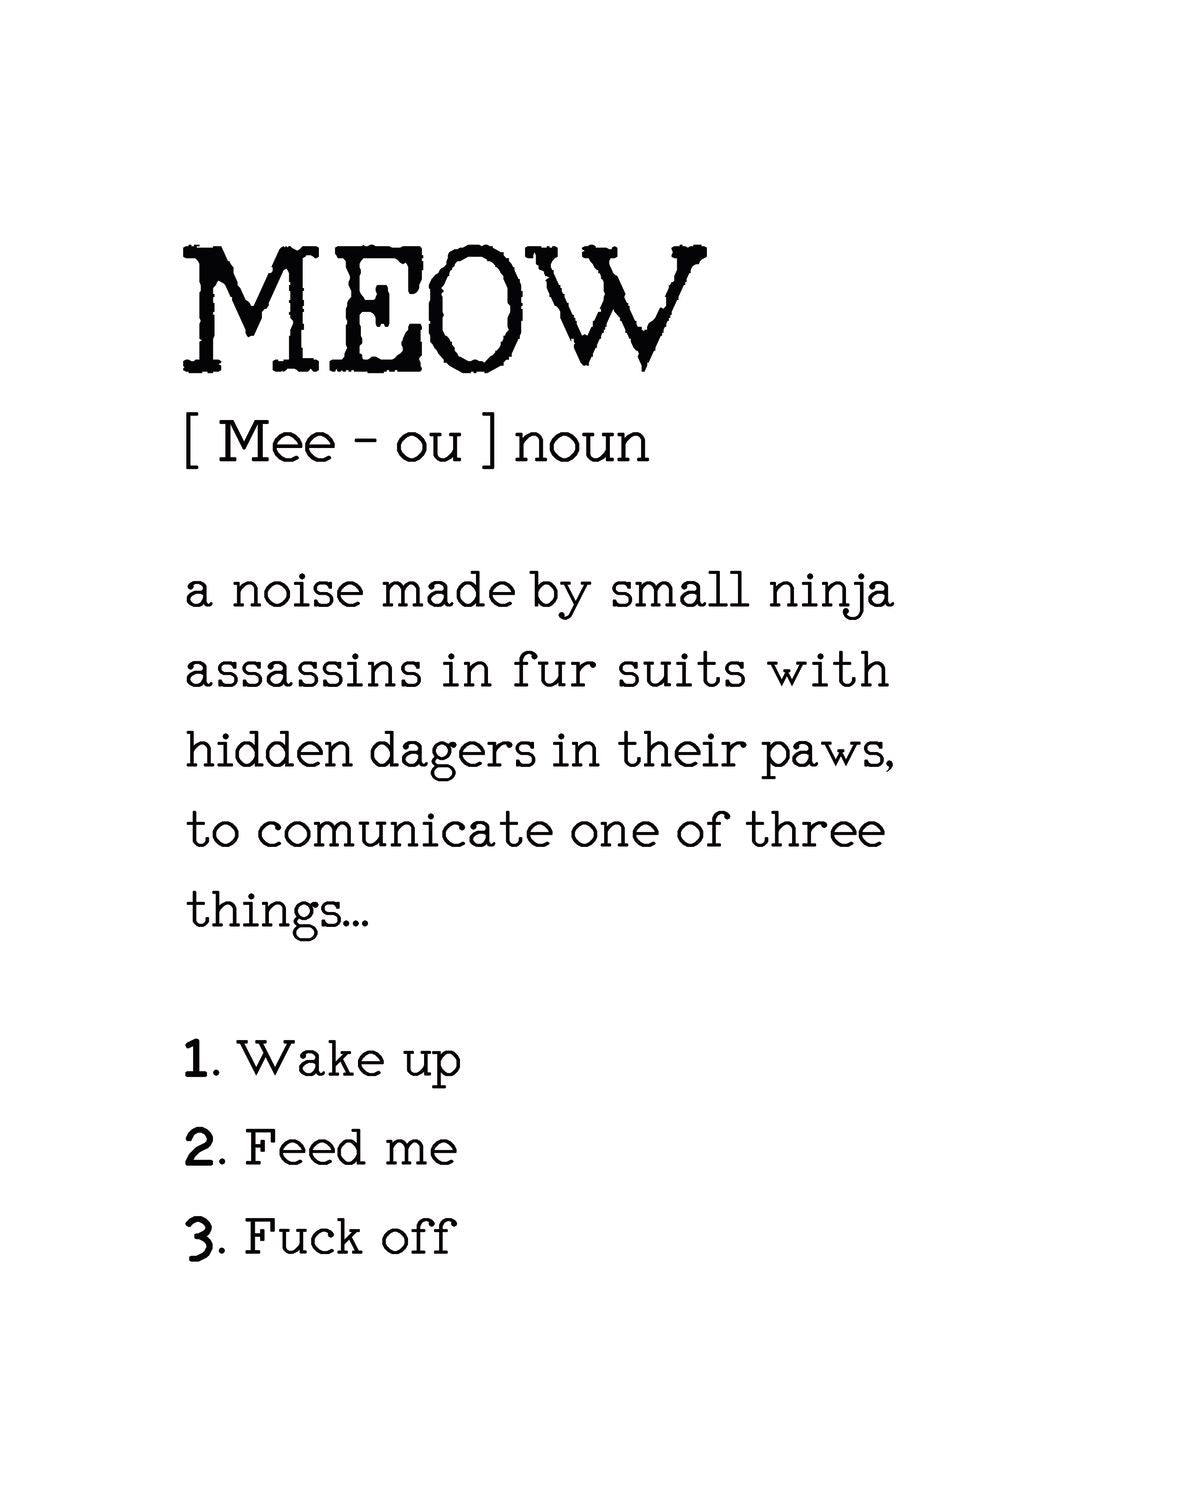 Cat's Meow Definition